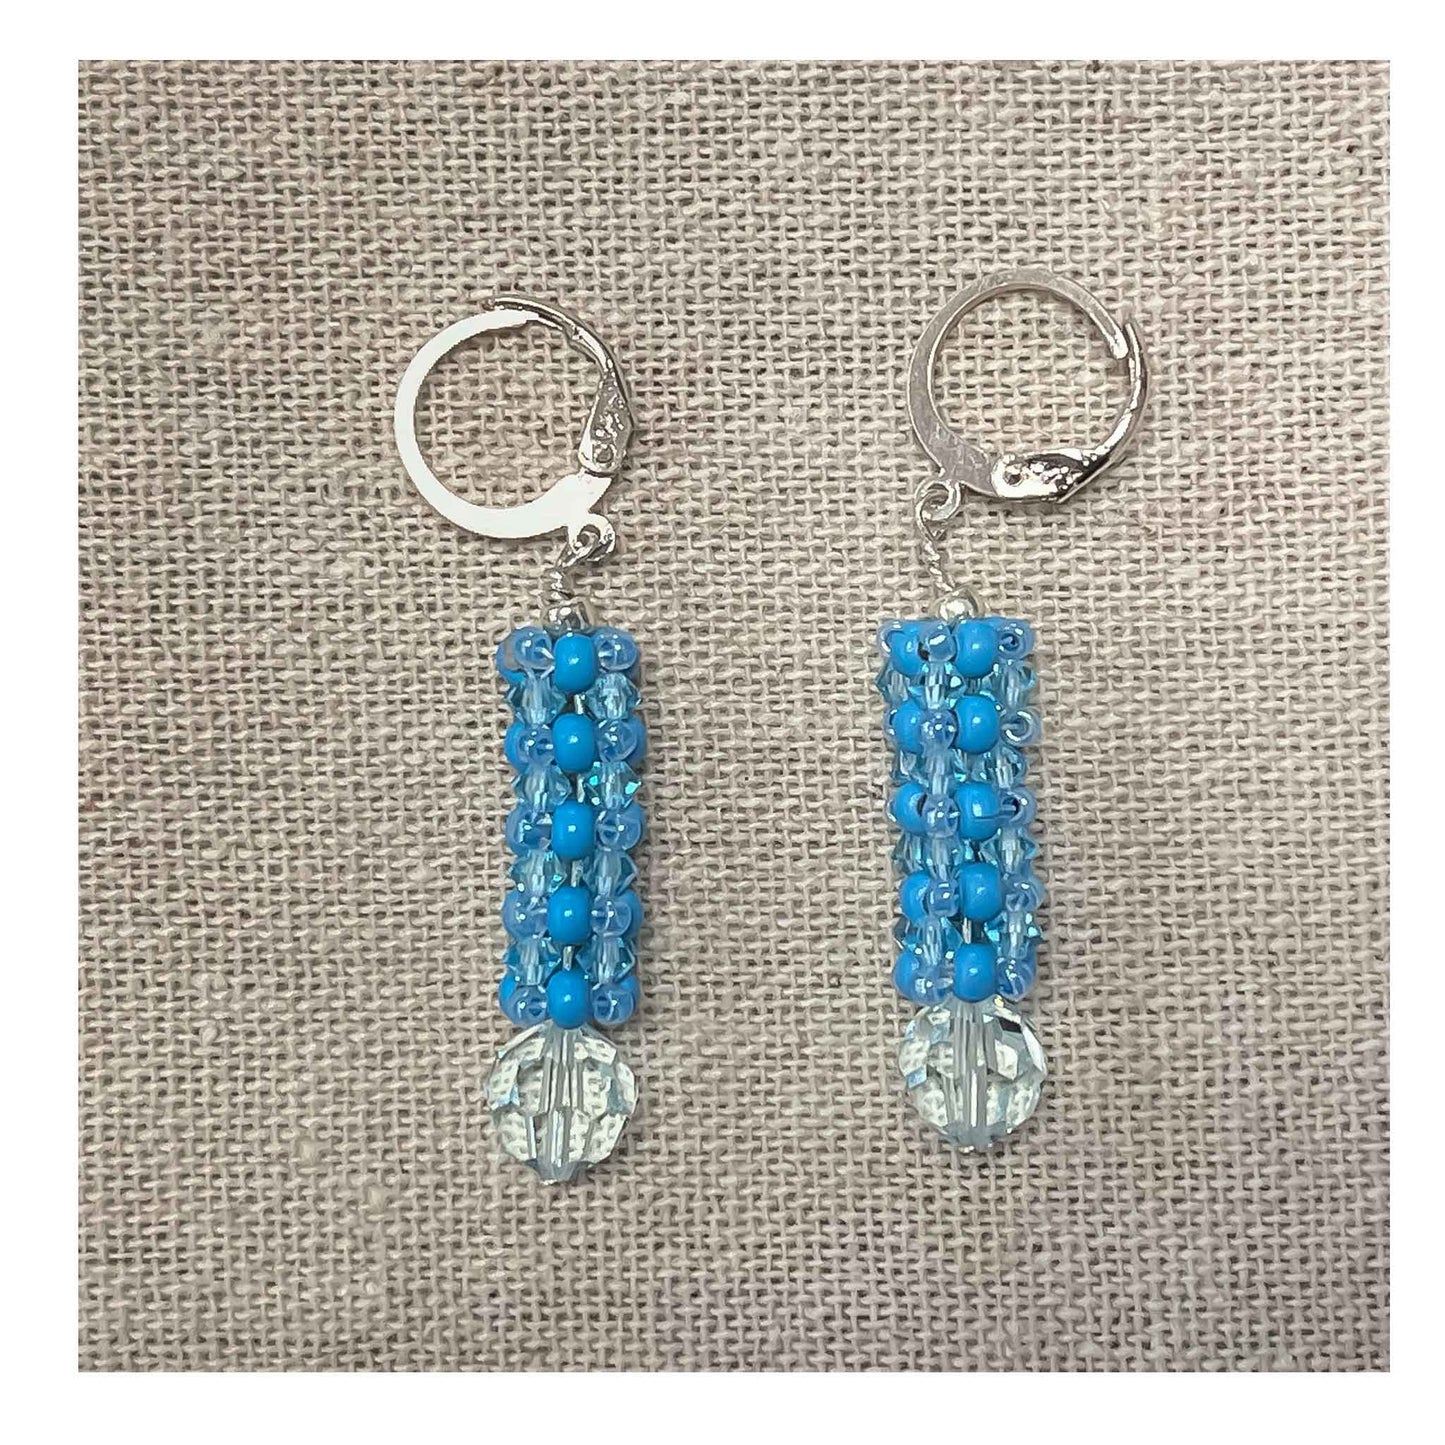 Light blue,  2mm metal beads, Beaded earrings, cubic right angle weave stitch,  Swarovski crystals, sterling silver, lever backs.